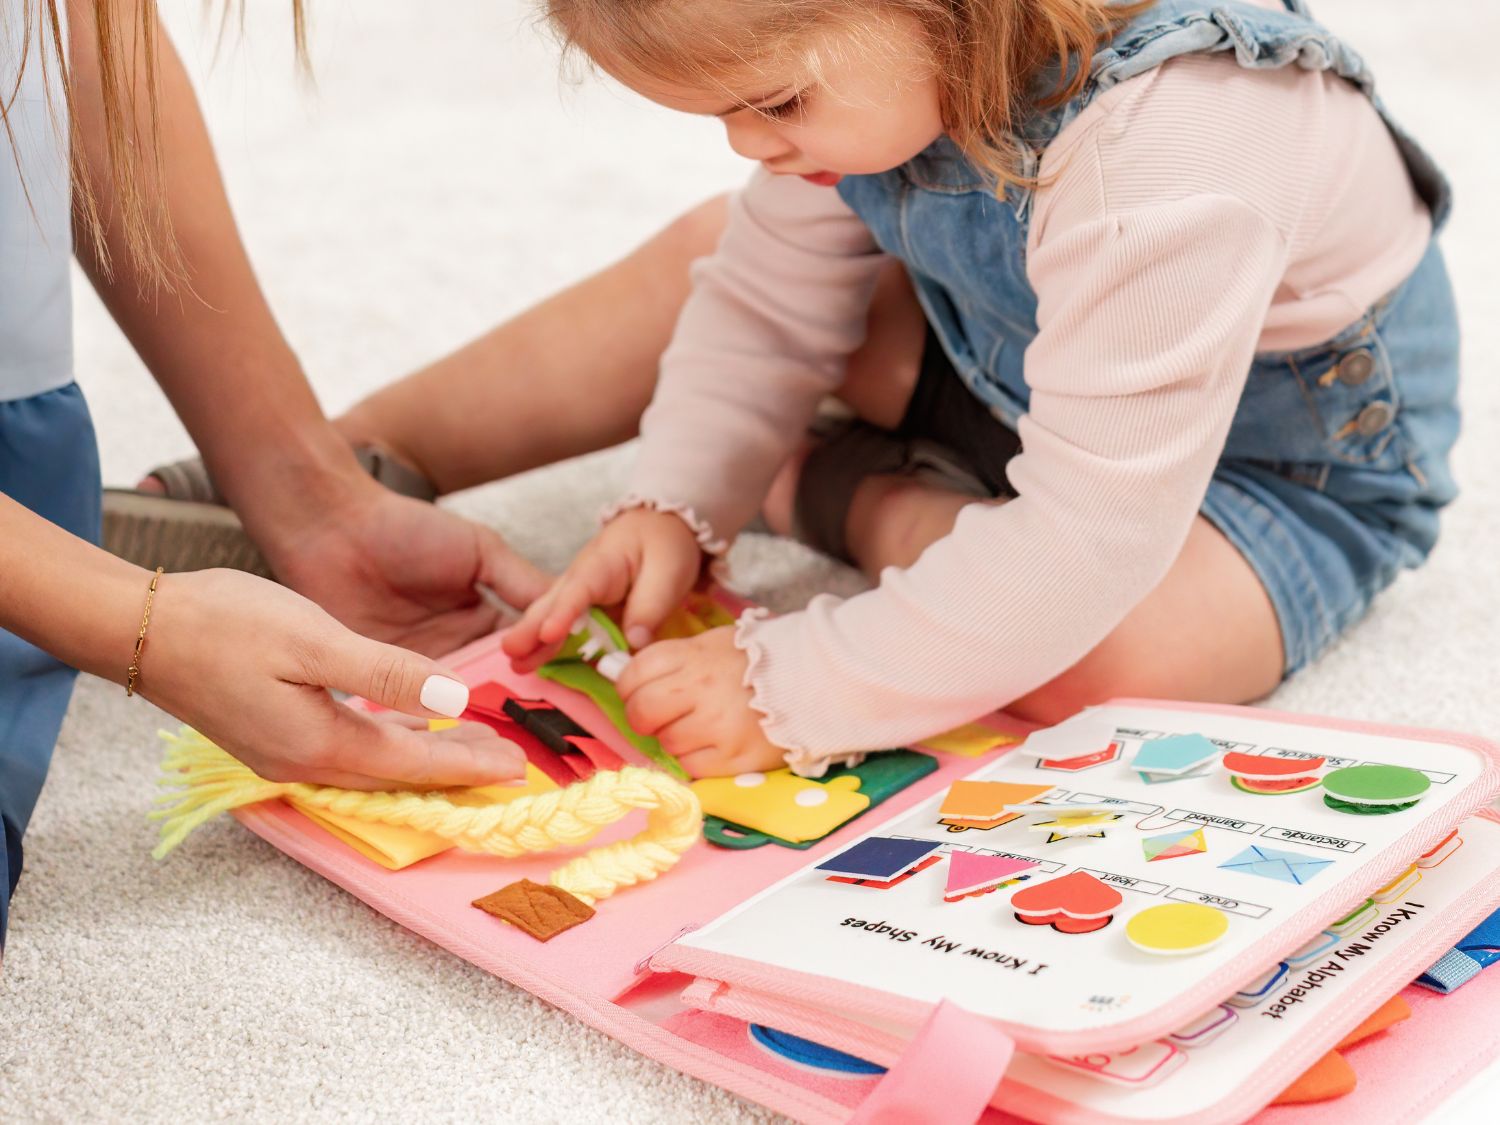 Travel-friendly backpack: A toddler activity backpack with a quiet book and busy board, perfect for travel with sensory learning activities.